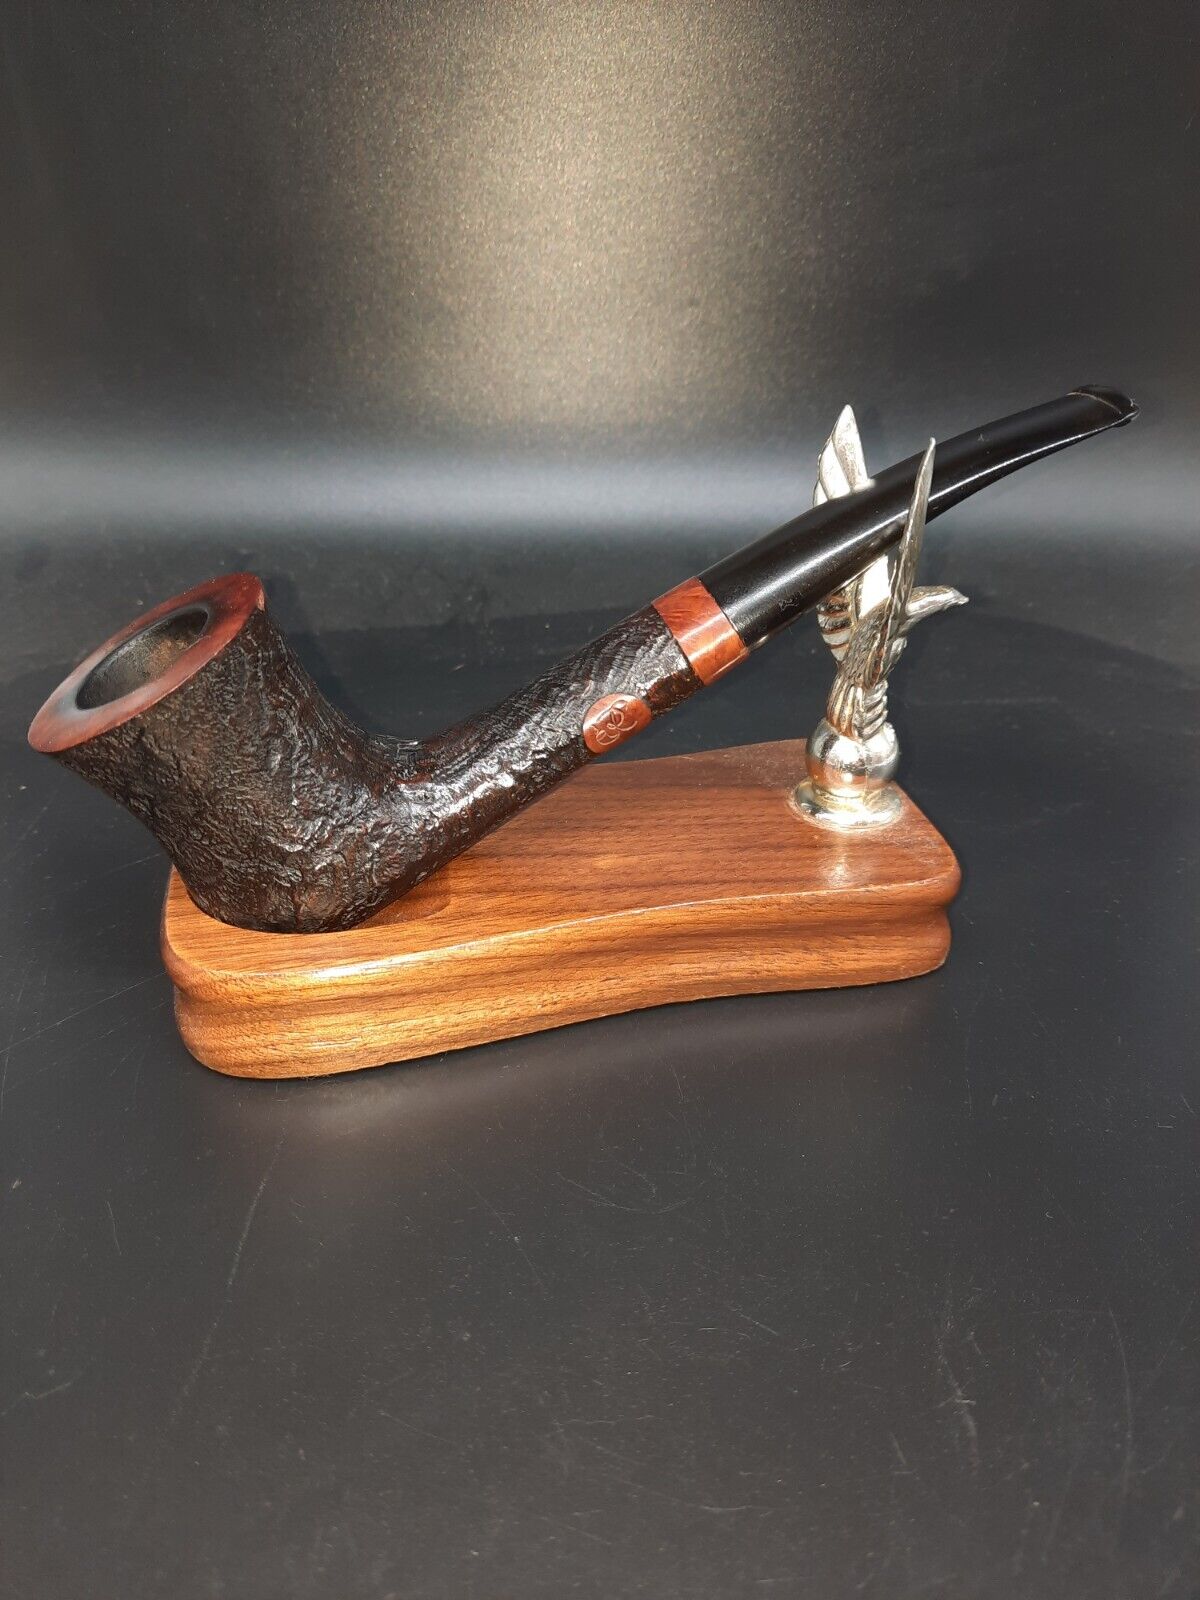 Steve & Roswitha Anderson Estate Tobacco Pipe Fully Refurbished Beautiful